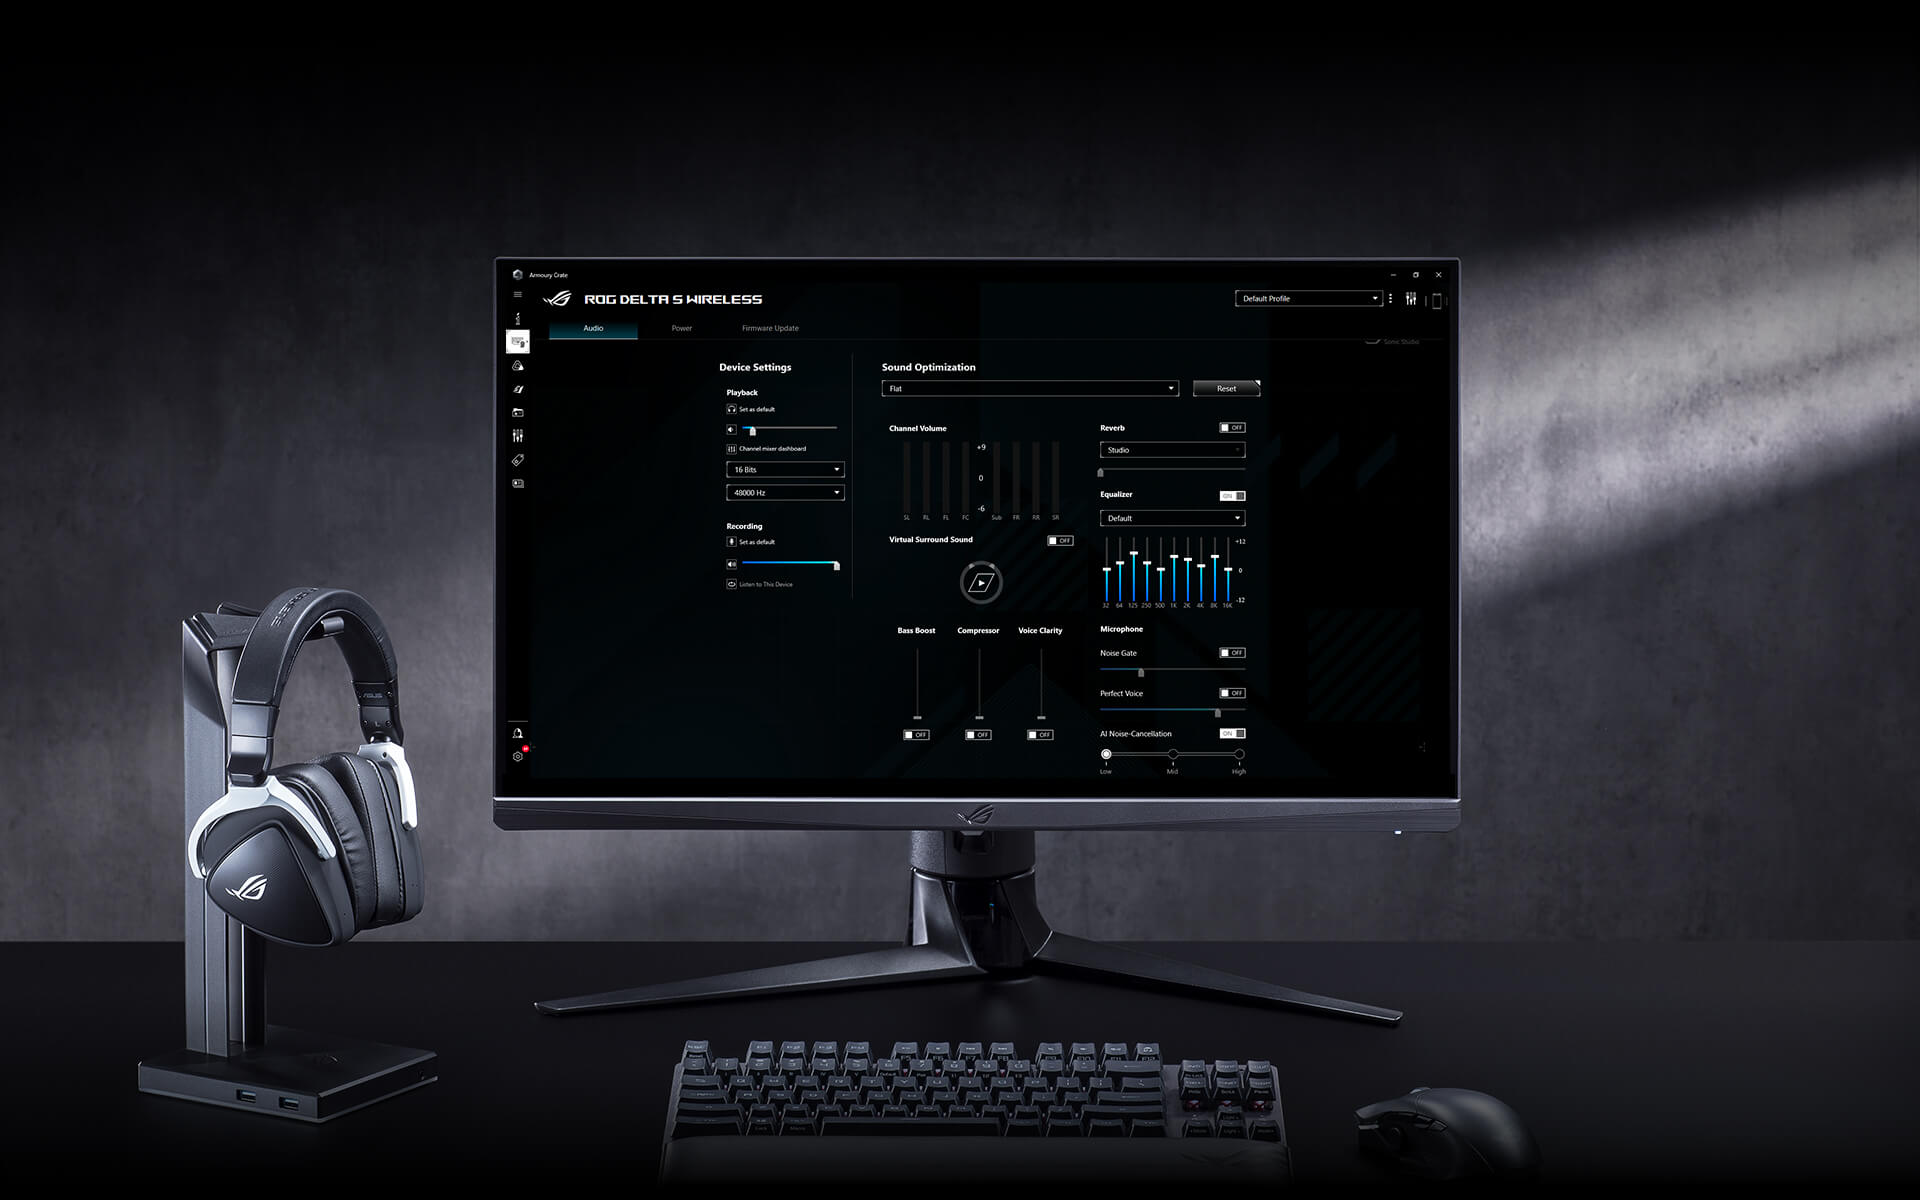 Scenario photo demonstrates Delta S Wireless with headset stand and the Armoury Crate interface on the ROG monitor